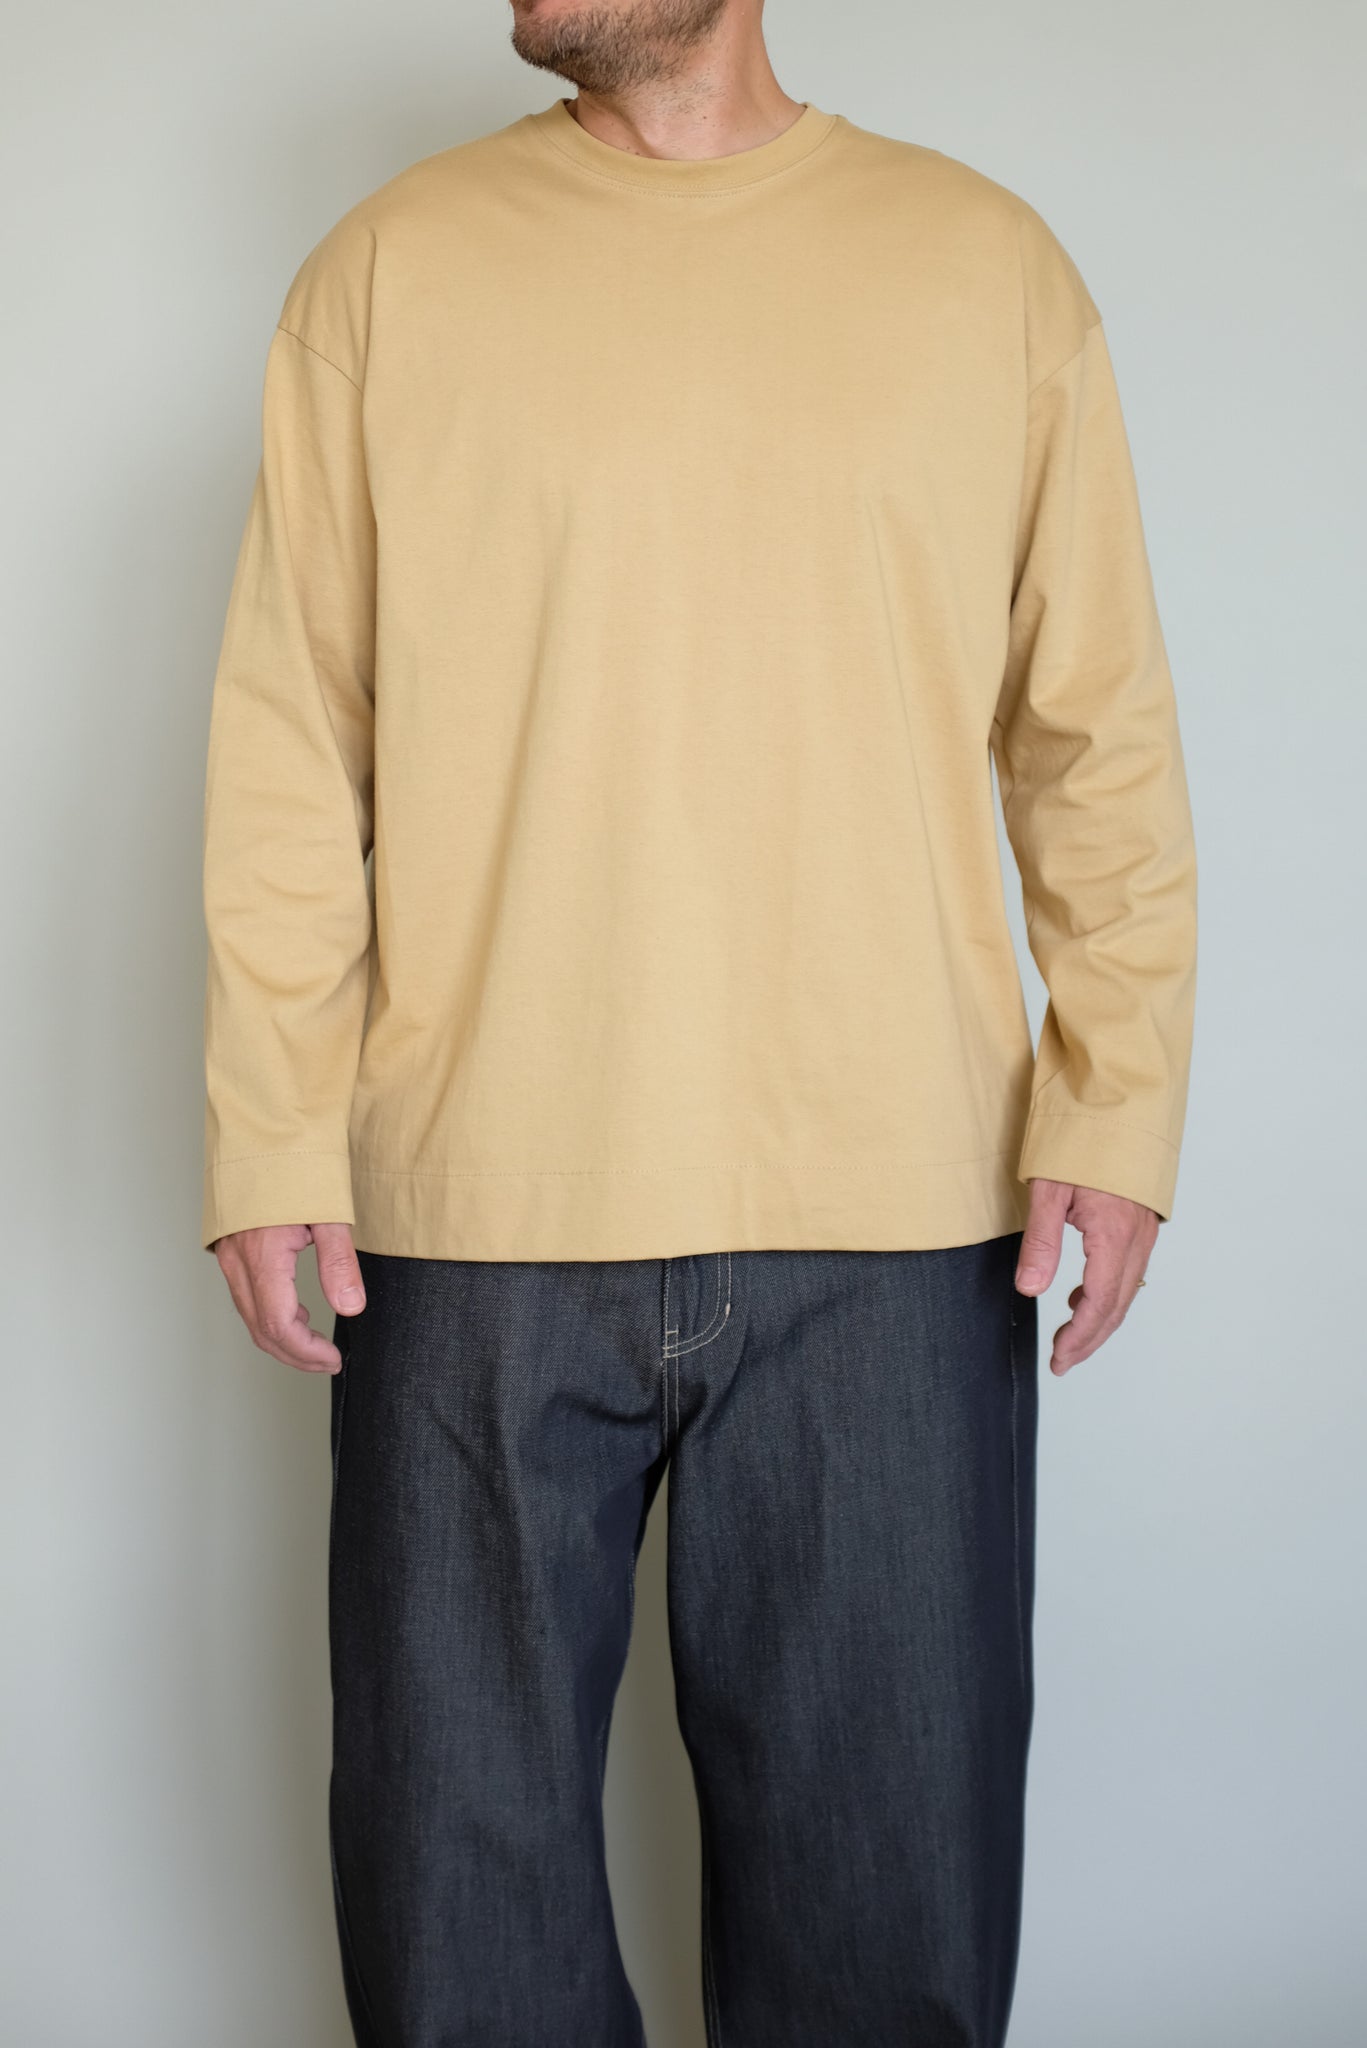 Long Sleeve Round neck Top in Mustard